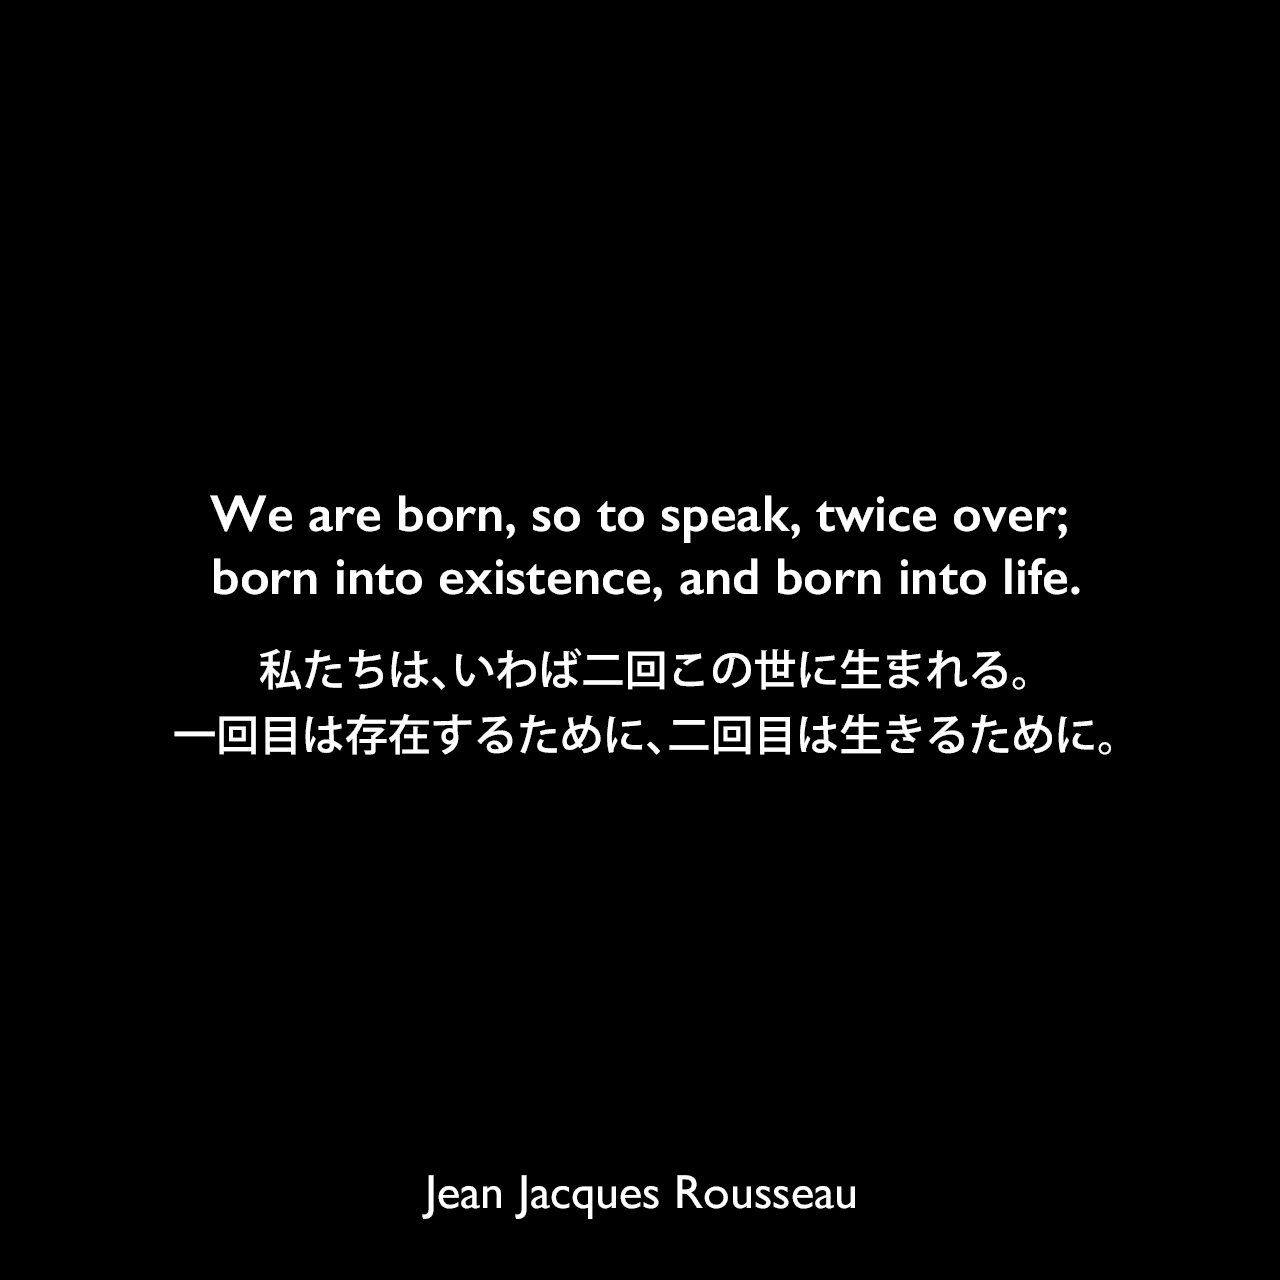 We are born, so to speak, twice over; born into existence, and born into life.私たちは、いわば二回この世に生まれる。一回目は存在するために、二回目は生きるために。Jean Jacques Rousseau